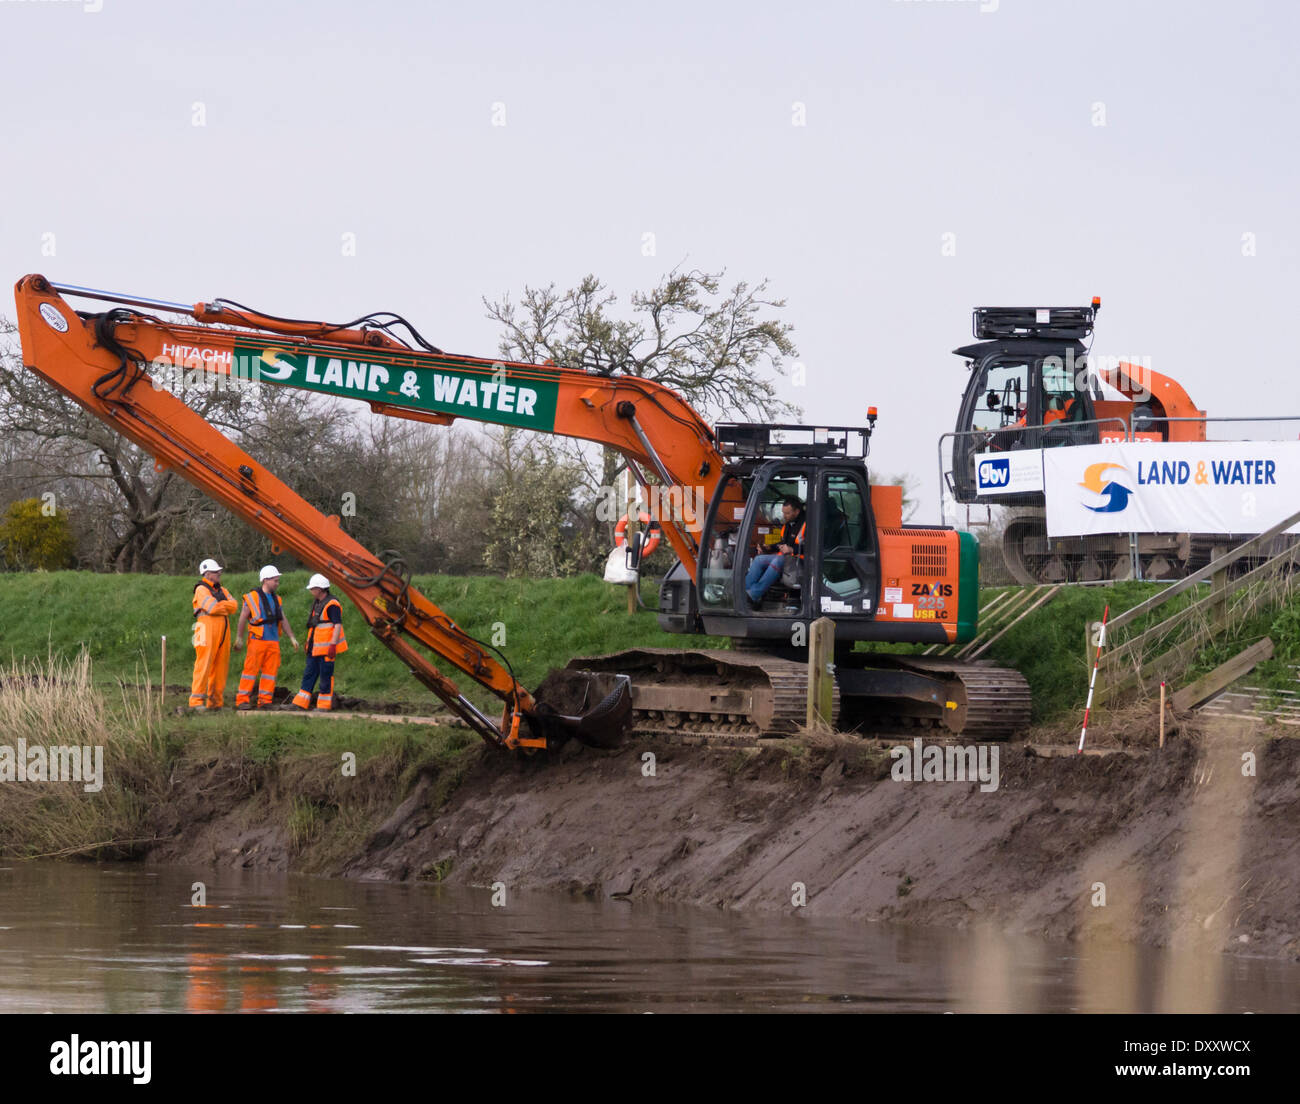 Burrowbridge, Somerset, UK. 31st March 2014. Work has commenced on the dredging of the River Parrett as part of a 20 year plan to alleviate the risk of flooding on the Somerset Levels. Contractors are shown operating long reach machinery just north of Burrowbridge to clear the banks ready for dredging to commence. Credit:  Mr Standfast/Alamy Live News Stock Photo